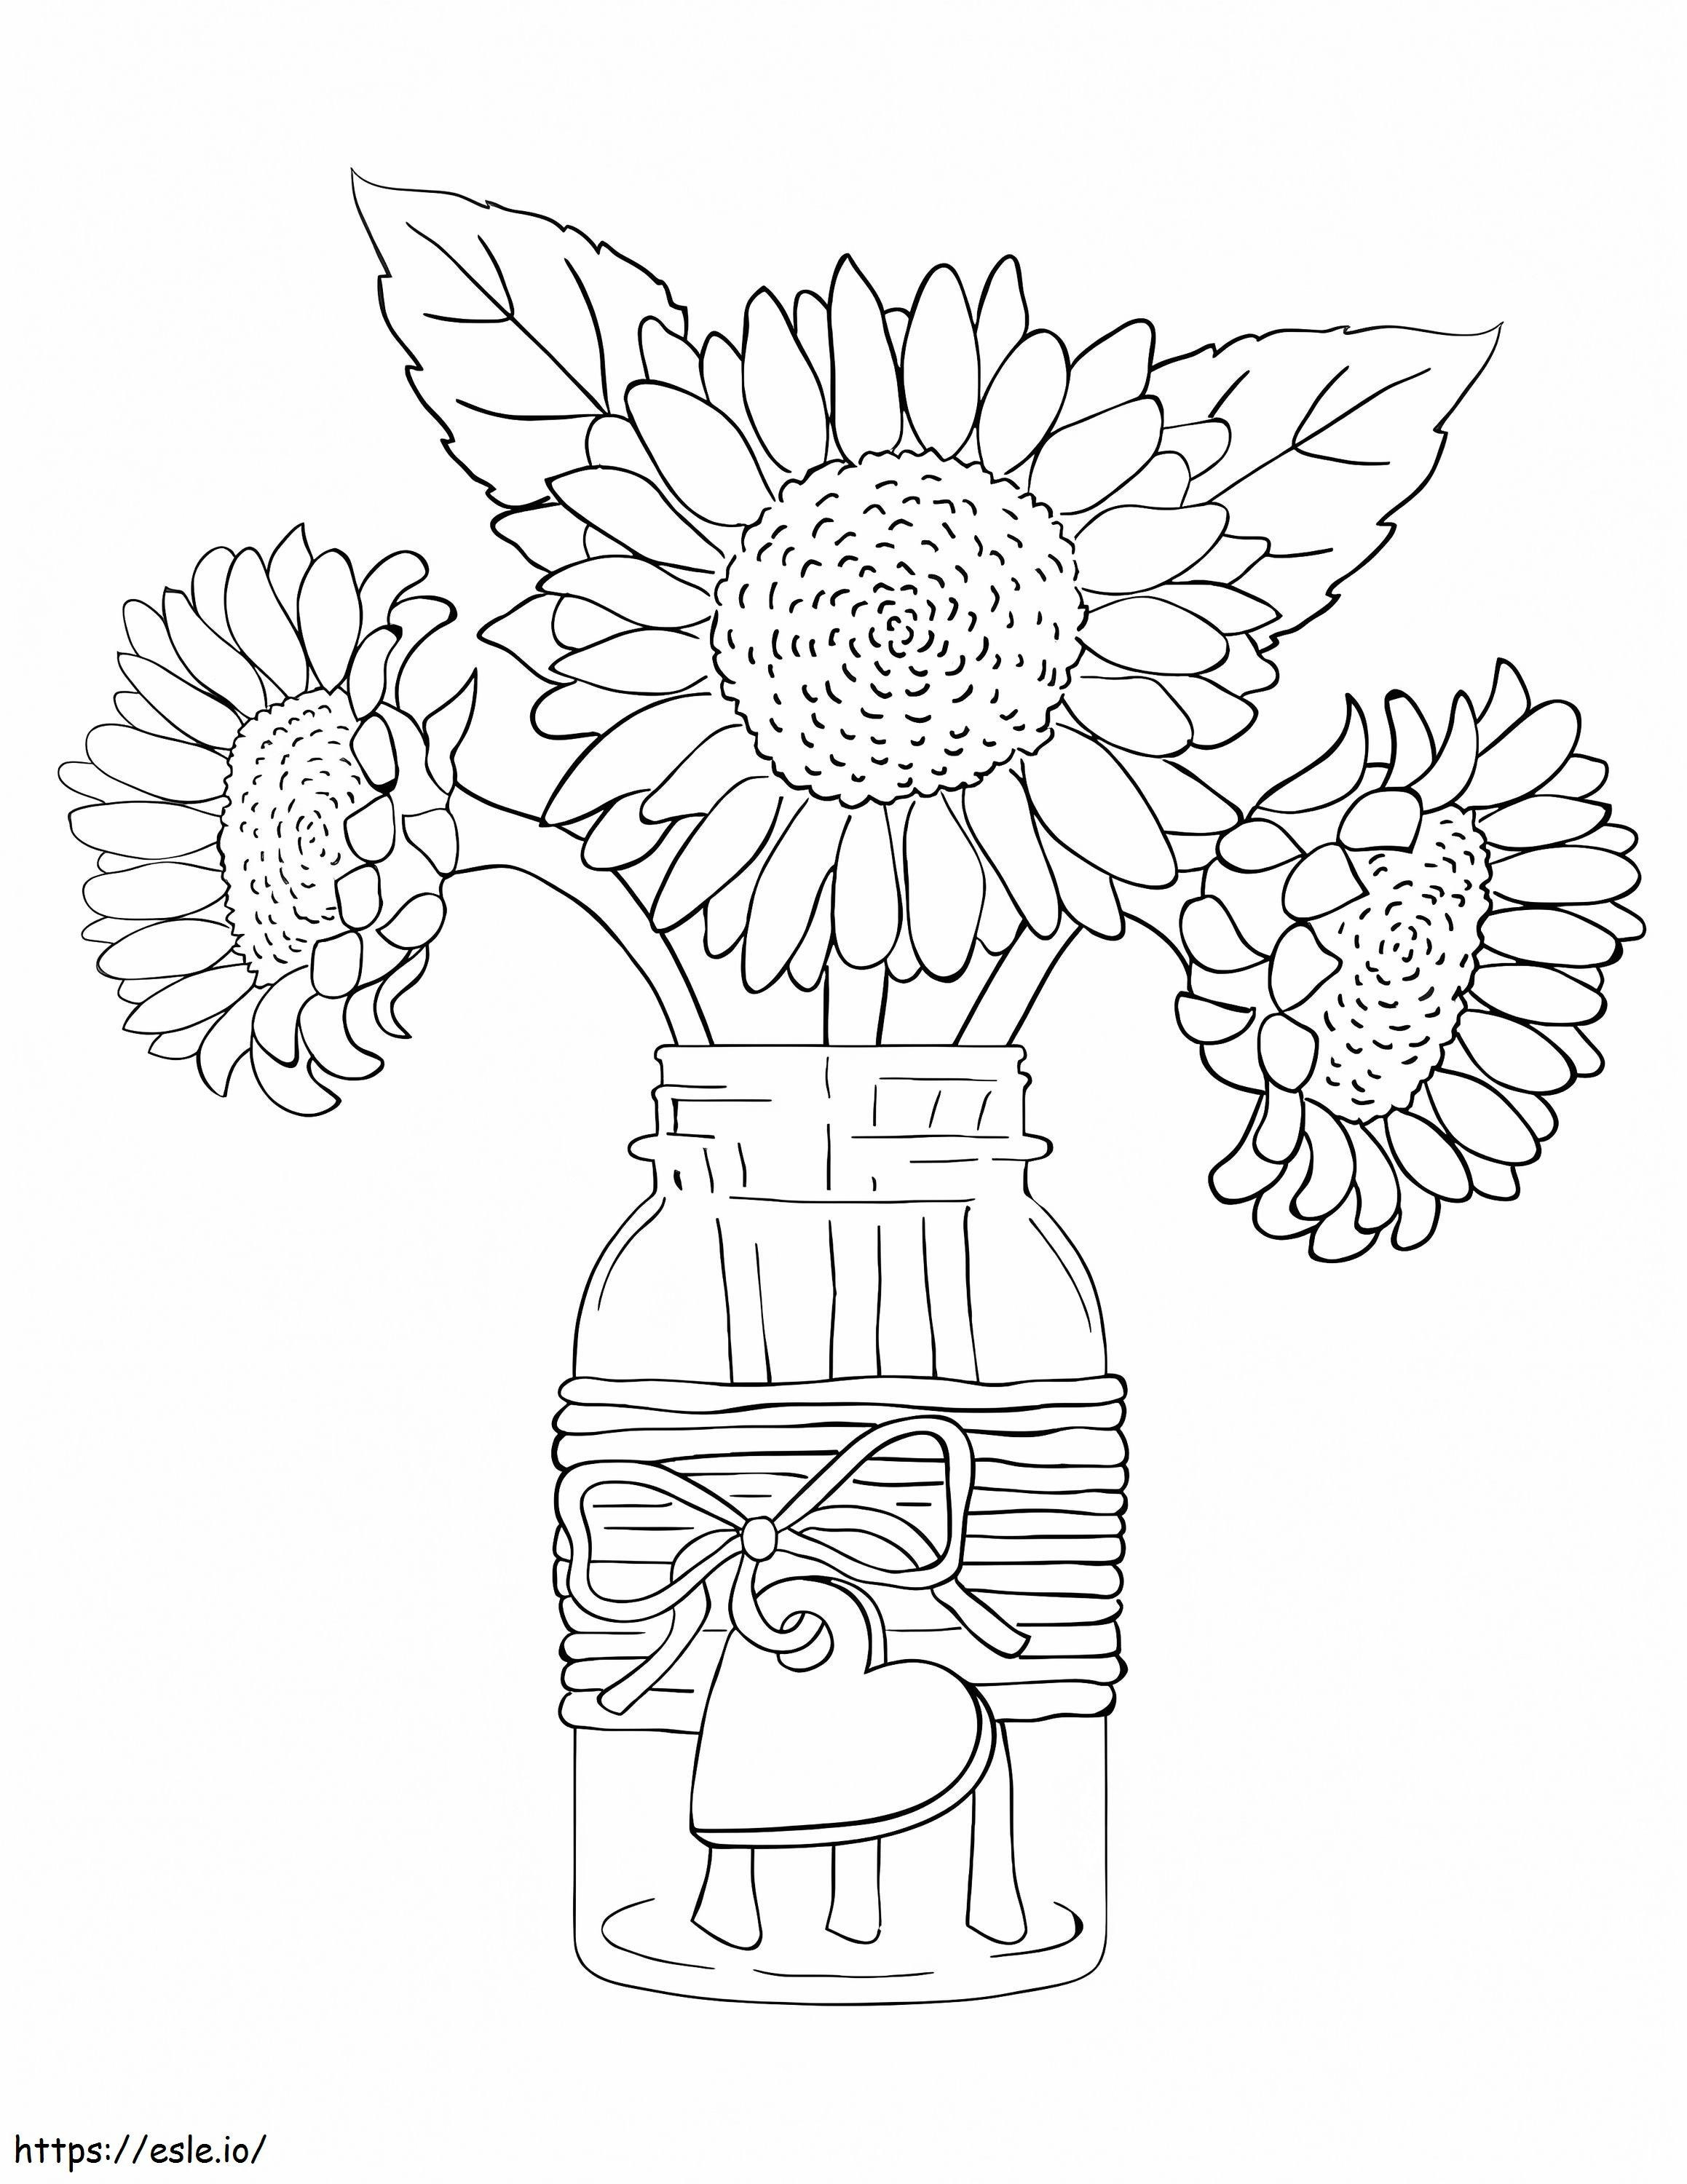 Sunflowers In Vase coloring page